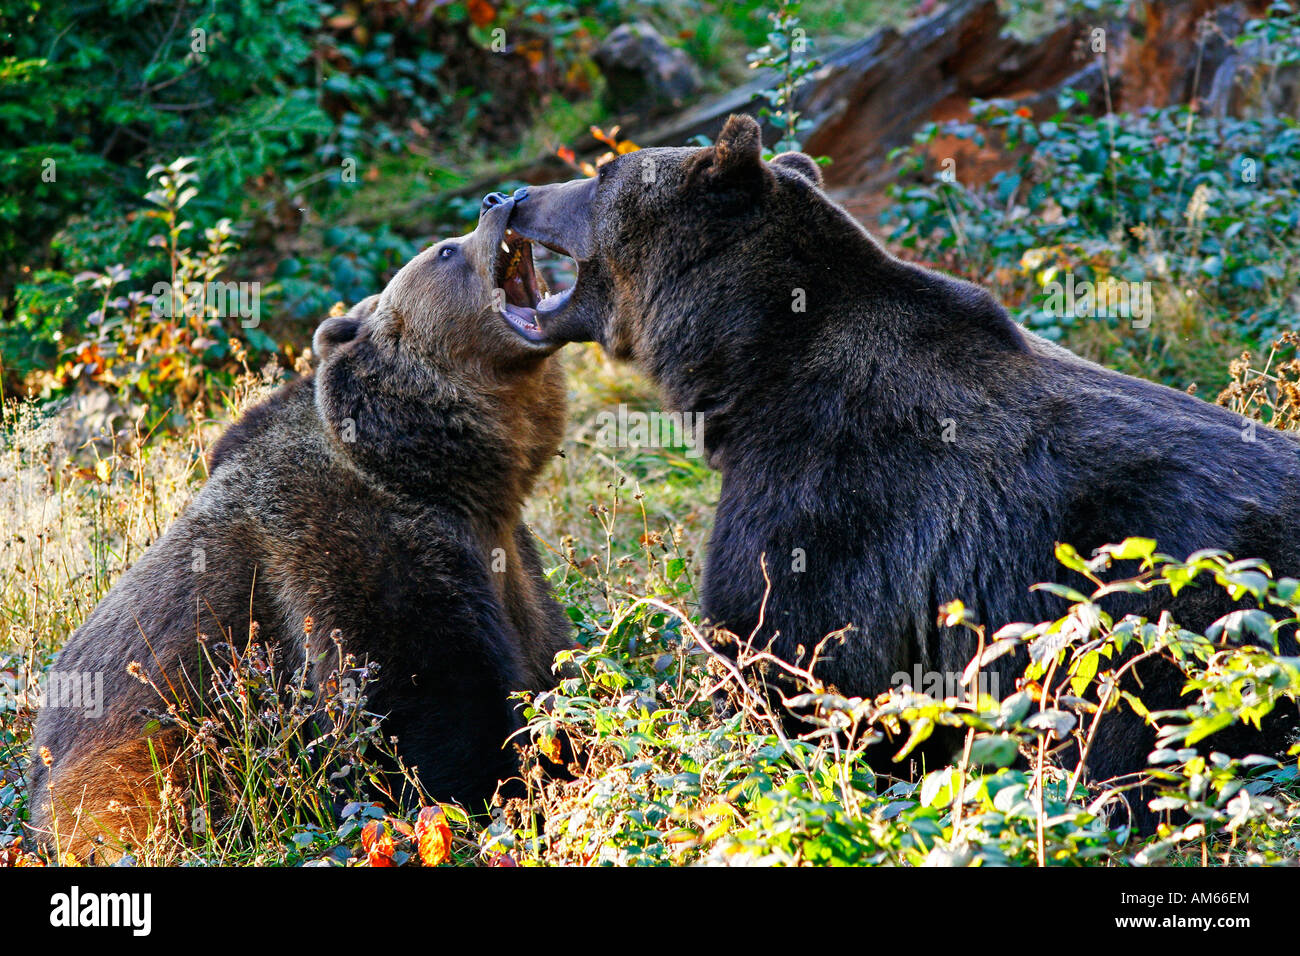 Playfully fighting brown bears (Ursus arctos) in autumnally coloured forest, outdoor enclosure Bavarian Forest, Germany Stock Photo